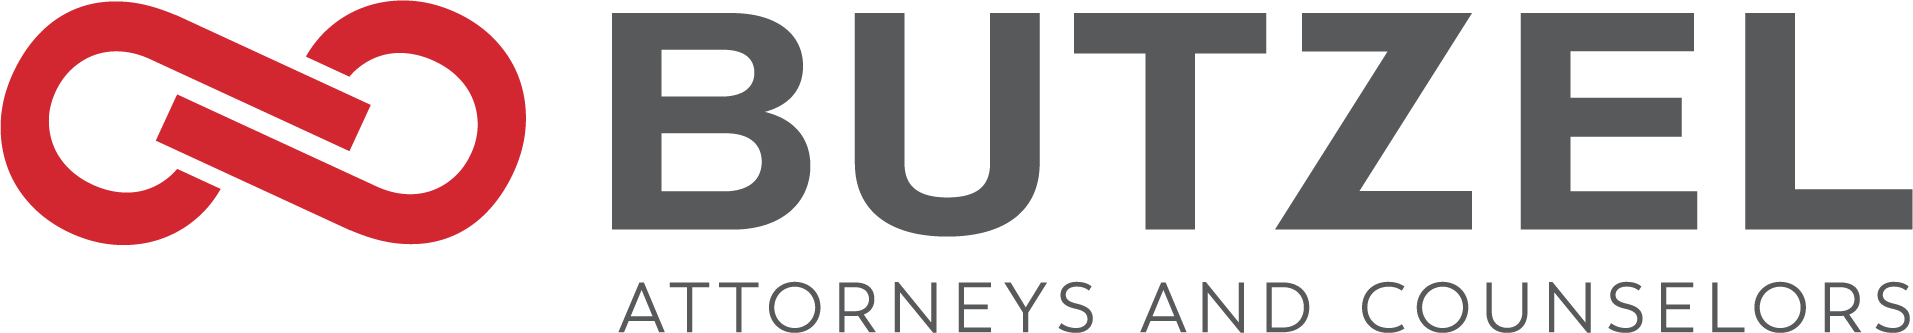 Butzel Attorneys and Counselors